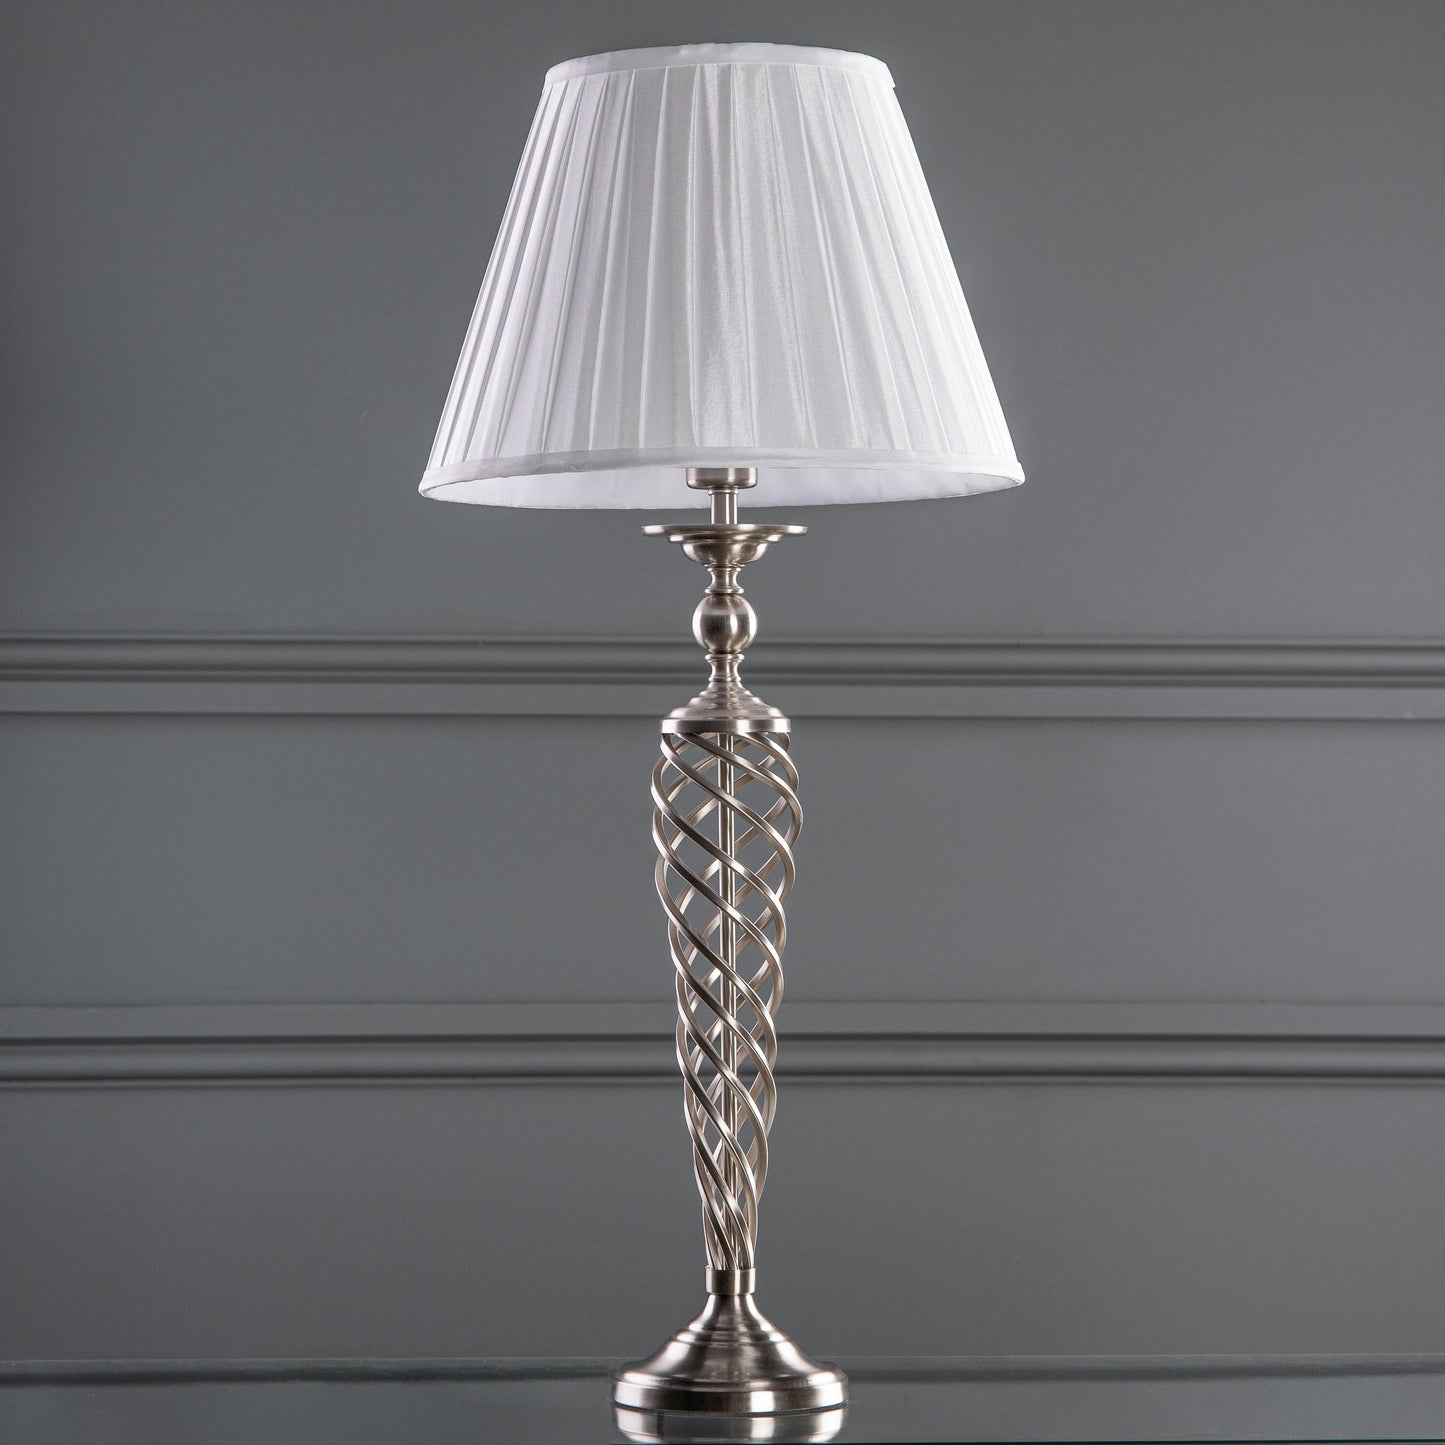 Lights  -  Siam Table Lamp Complete With Shade Satin Chrome  -  50085213